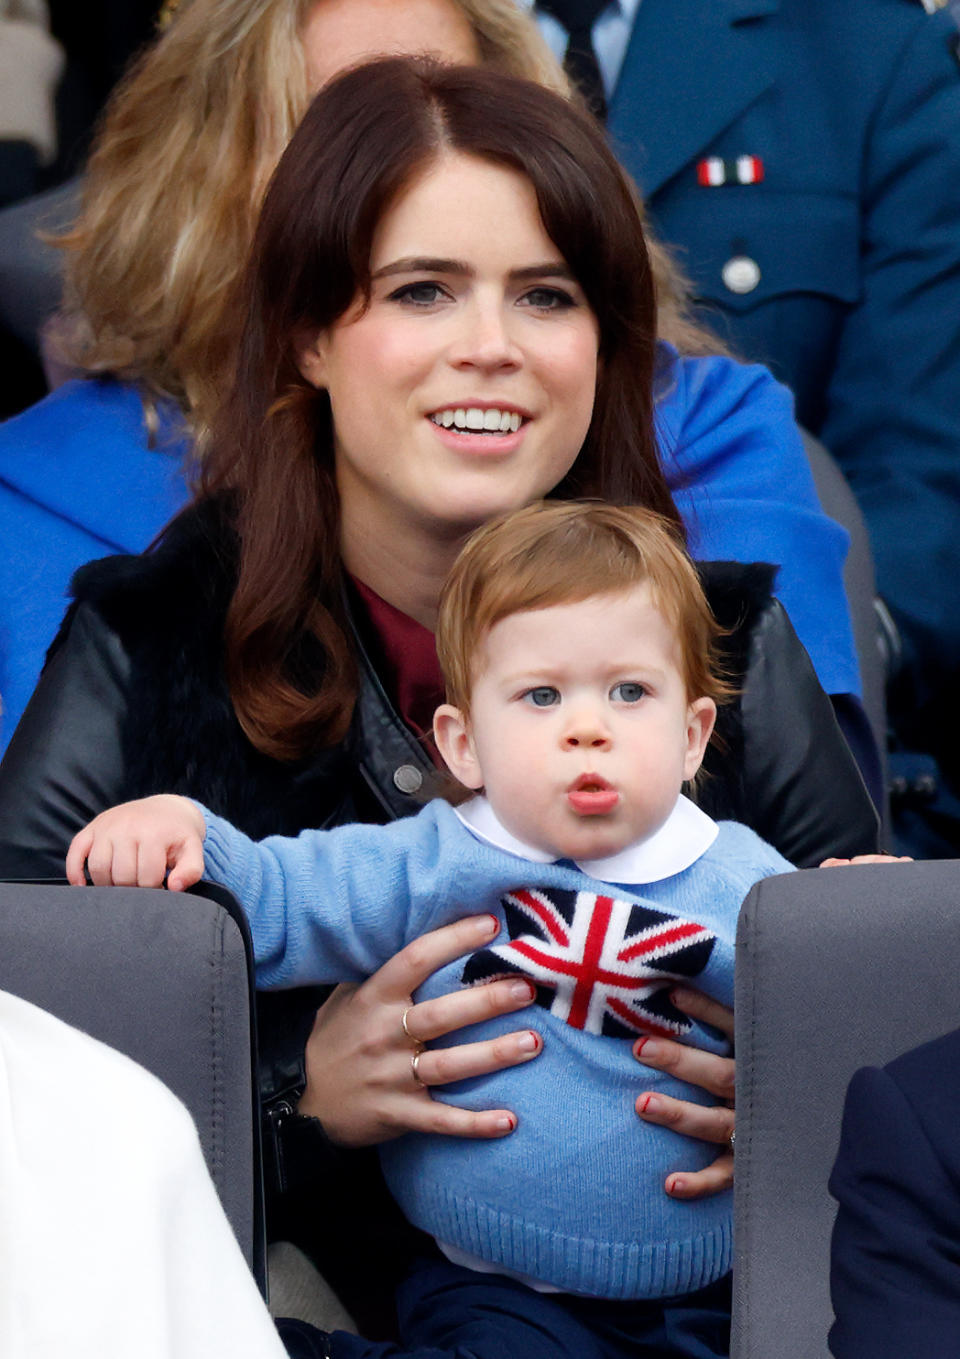 LONDON, UNITED KINGDOM - JUNE 05: (EMBARGOED FOR PUBLICATION IN UK NEWSPAPERS UNTIL 24 HOURS AFTER CREATE DATE AND TIME) Princess Eugenie and son August Brooksbank attend the Platinum Pageant on The Mall on June 5, 2022 in London, England. The Platinum Jubilee of Elizabeth II is being celebrated from June 2 to June 5, 2022, in the UK and Commonwealth to mark the 70th anniversary of the accession of Queen Elizabeth II on 6 February 1952. (Photo by Max Mumby/Indigo/Getty Images)